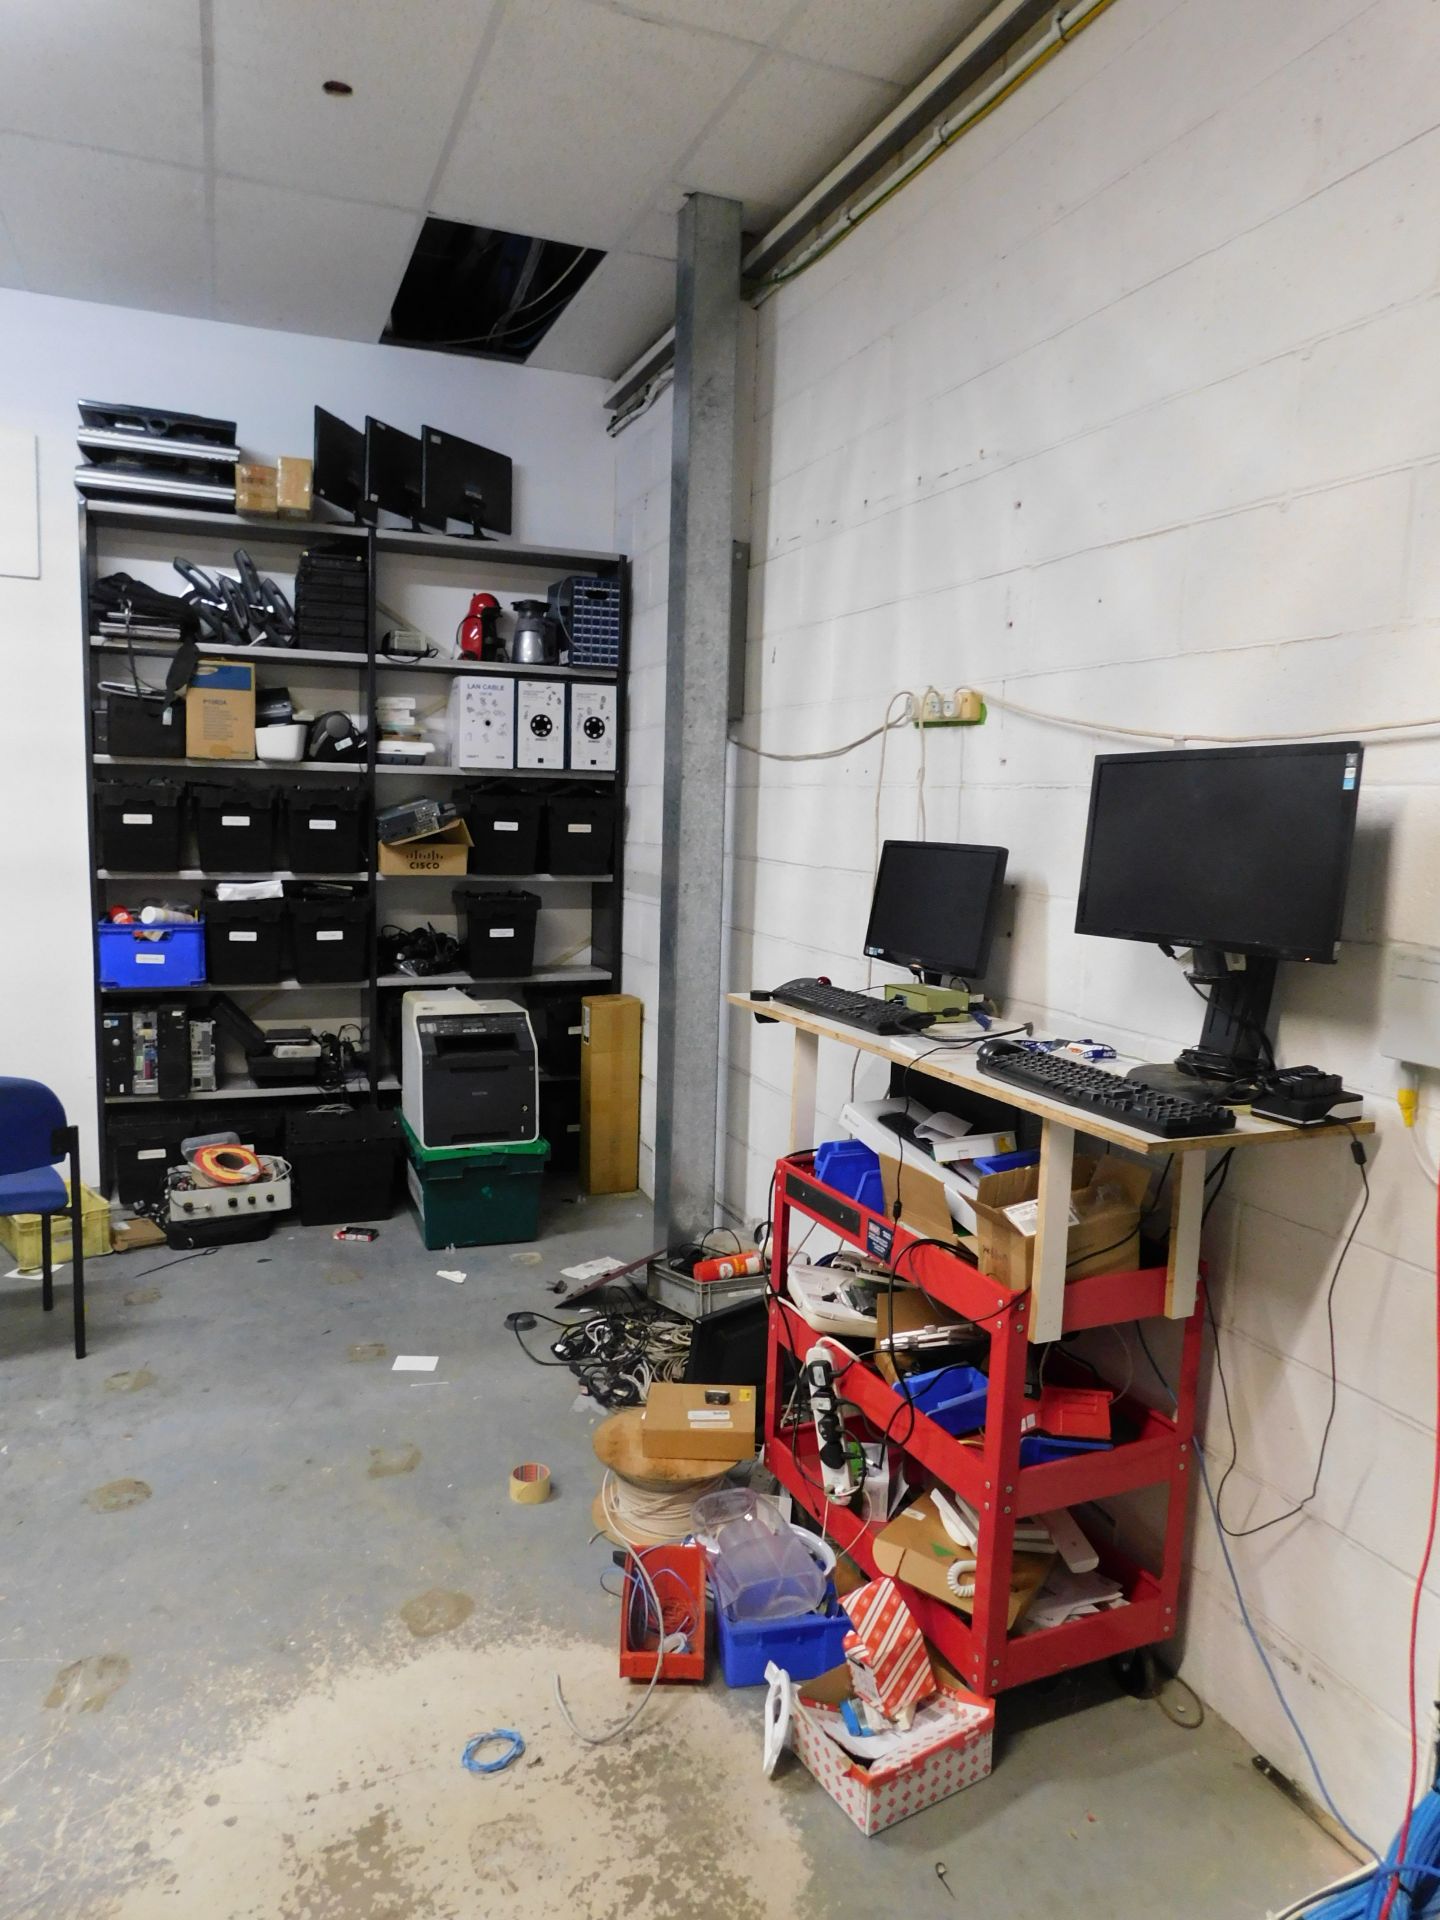 Room & Contents of Workwear & Exhibition Stands (Laptops, Computers & Contents of Comms Cabinet